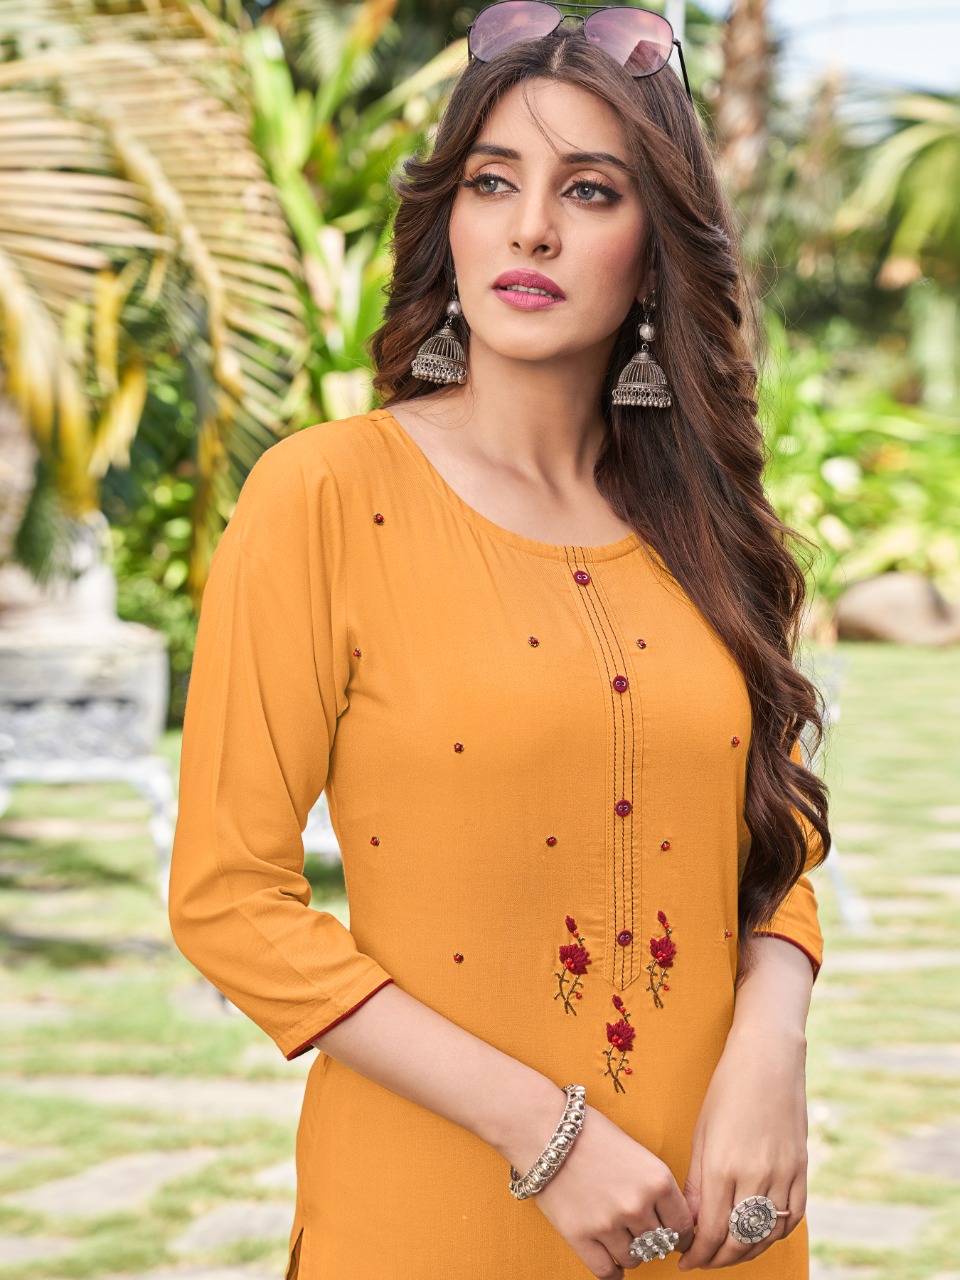 lilly style of india diva rayon regal look kurti catalog